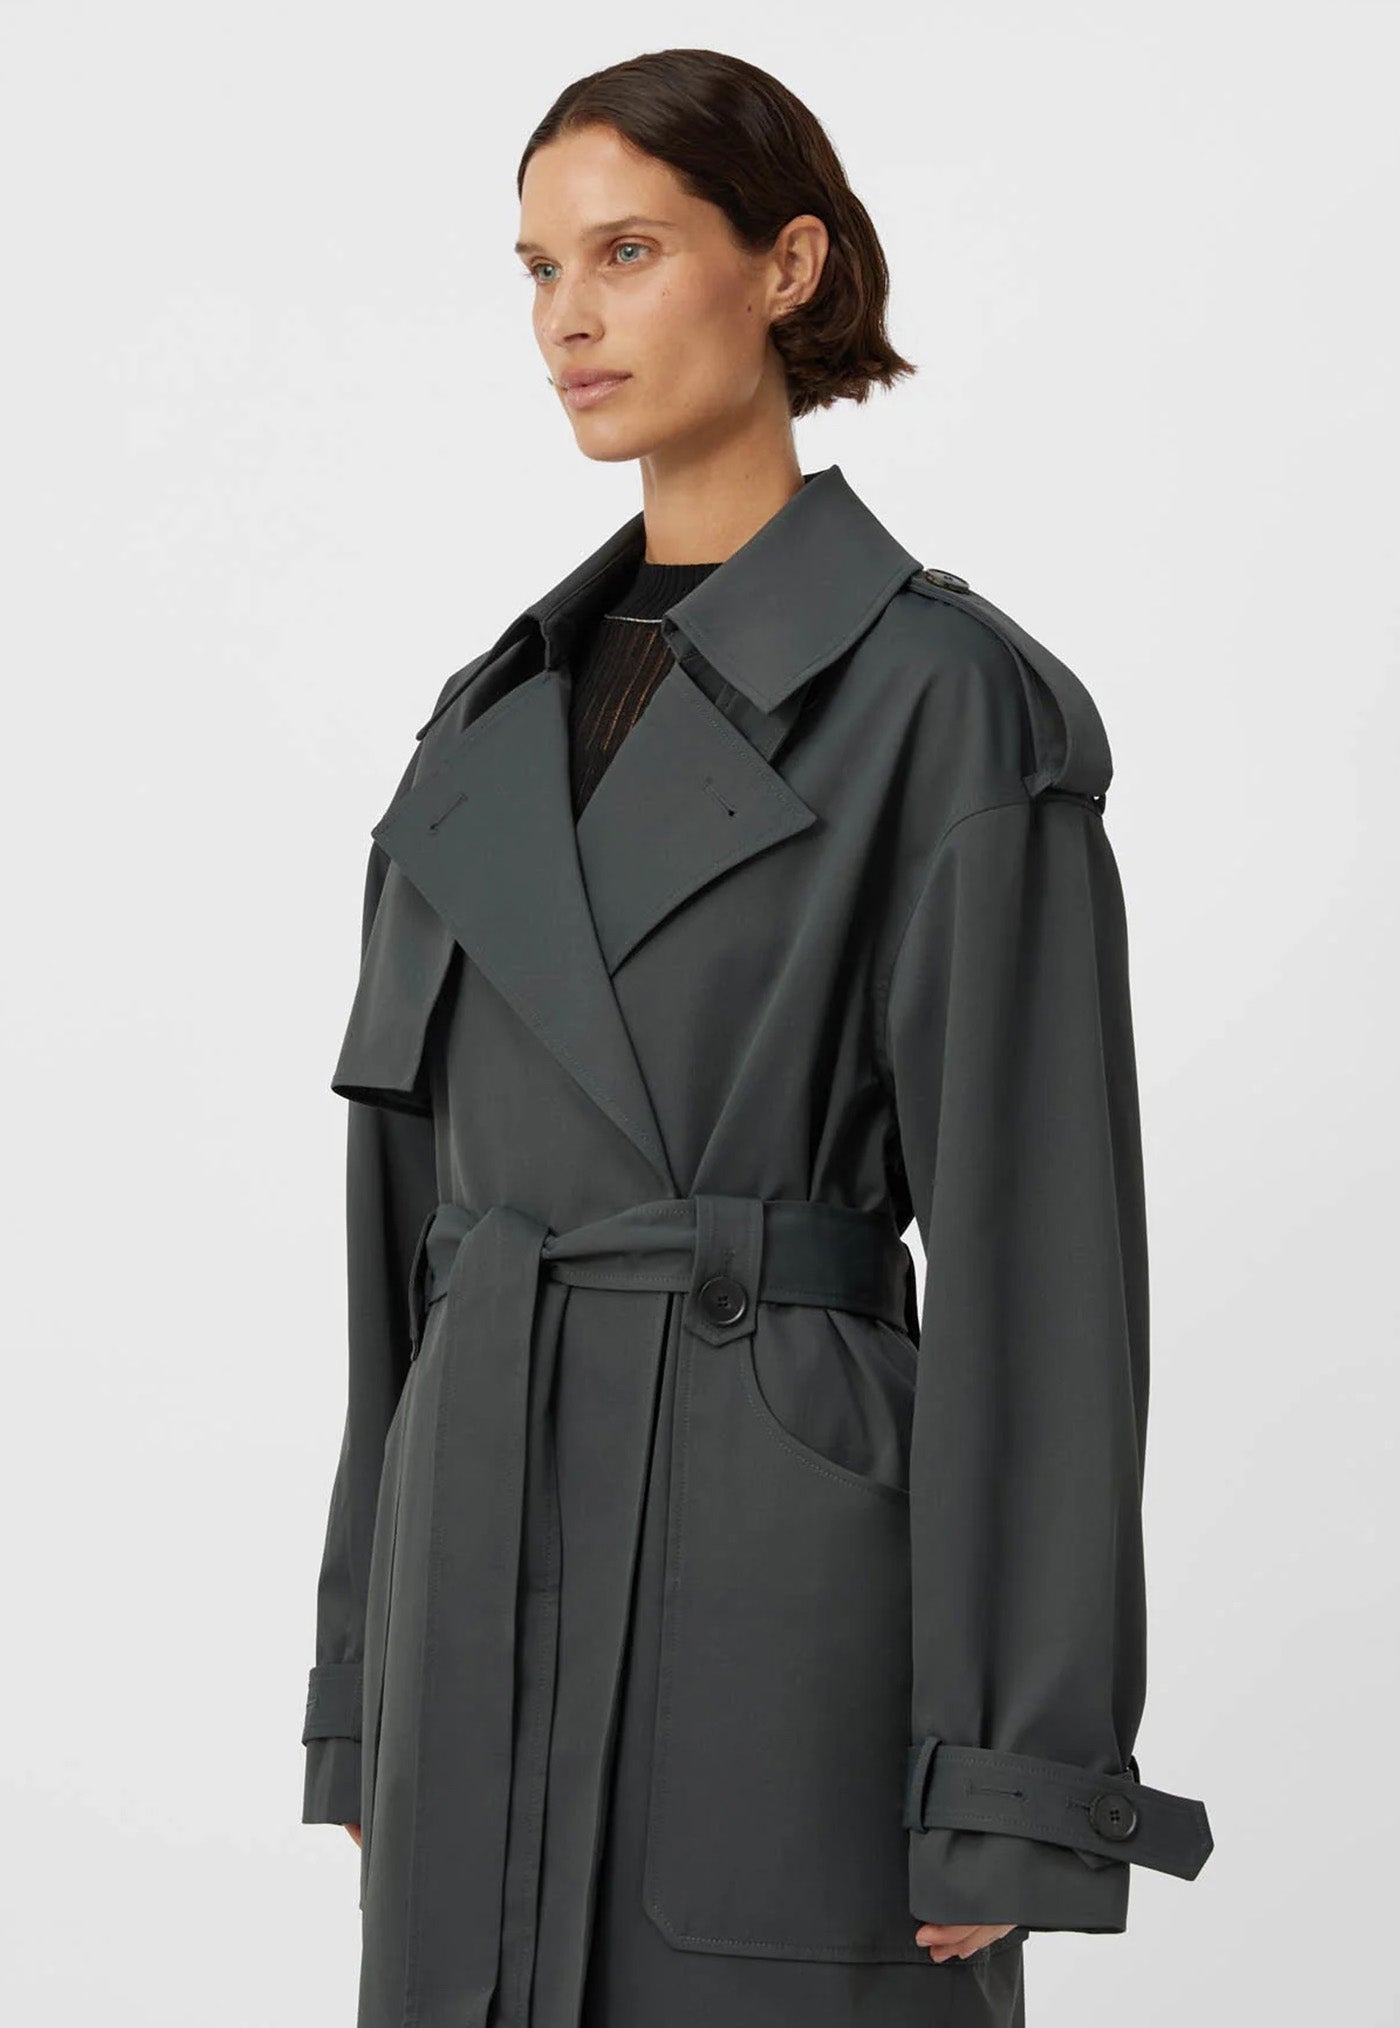 Reyes Trench Coat - Charcoal sold by Angel Divine